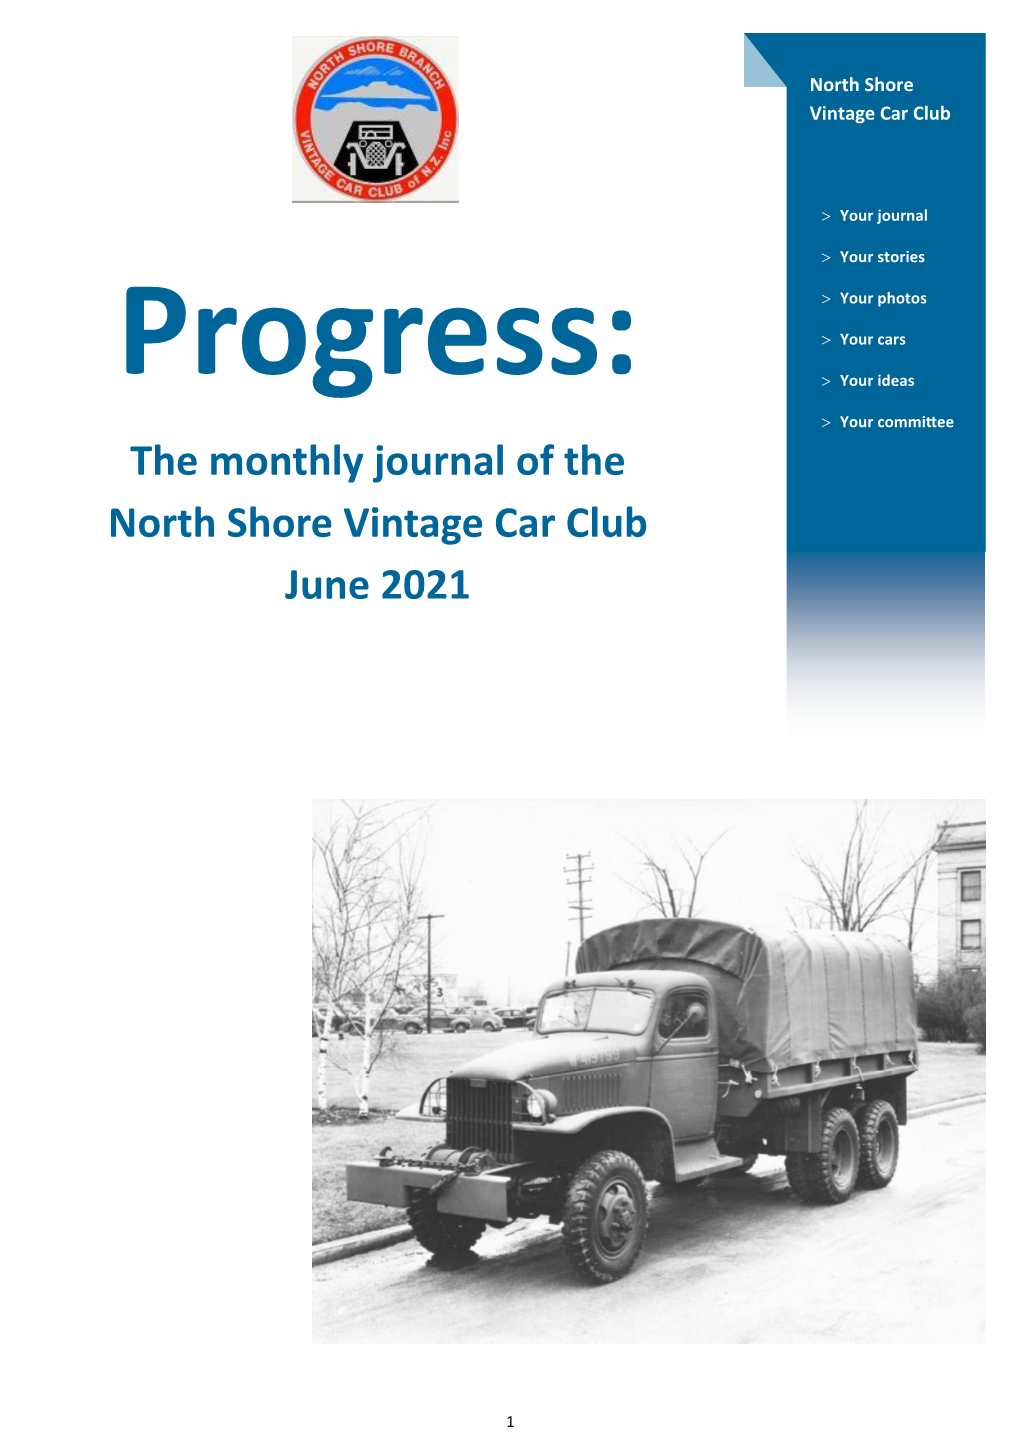 The Monthly Journal of the North Shore Vintage Car Club June 2021